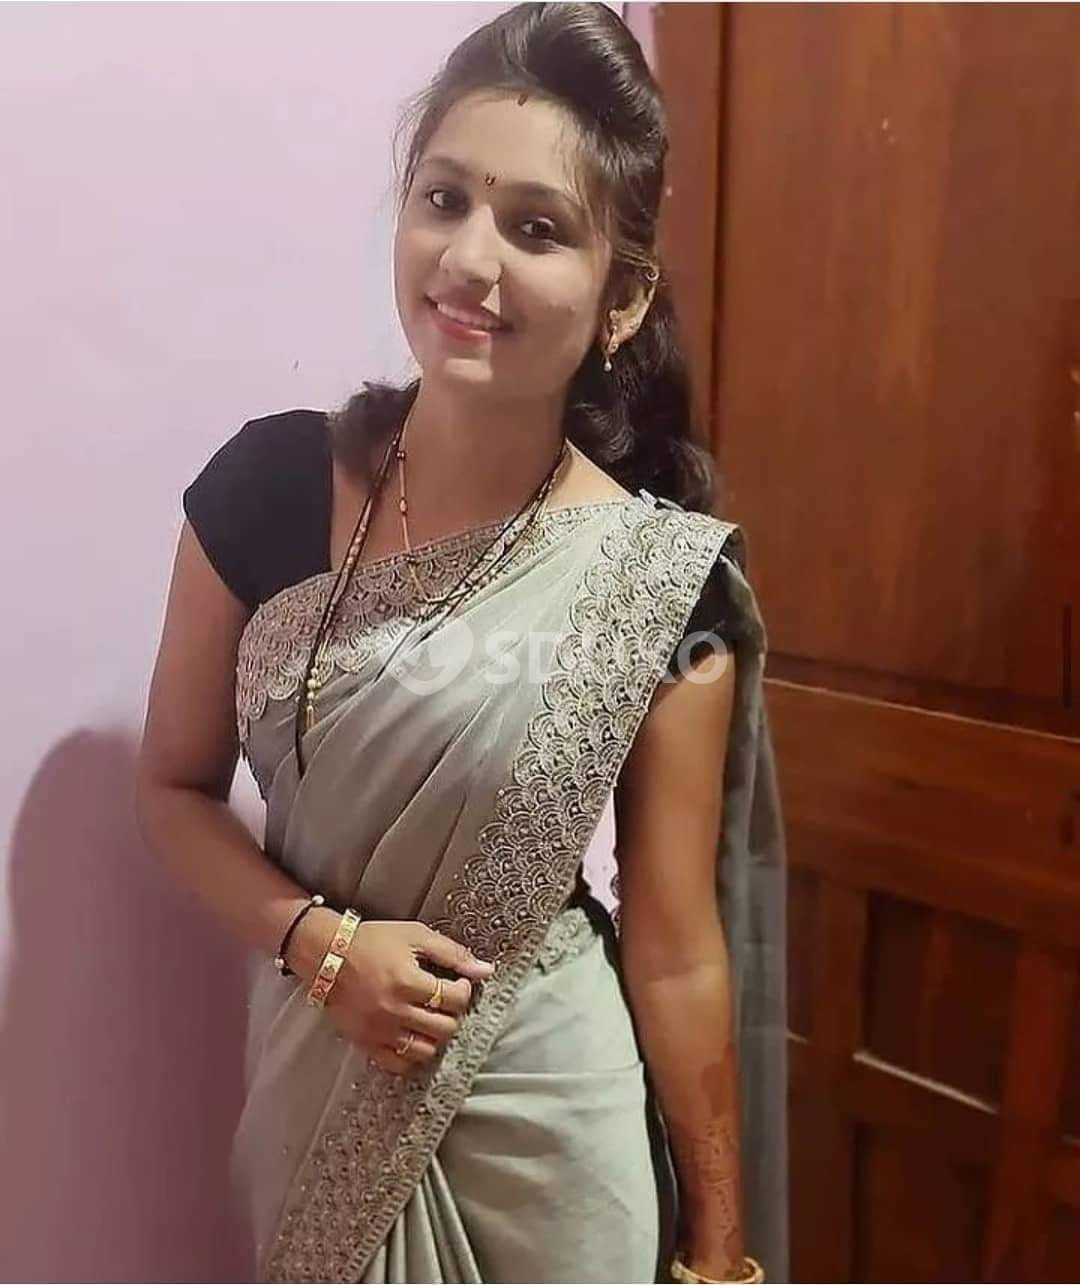 Airoli real genuine college girls full open sex body to body massage unlimited short